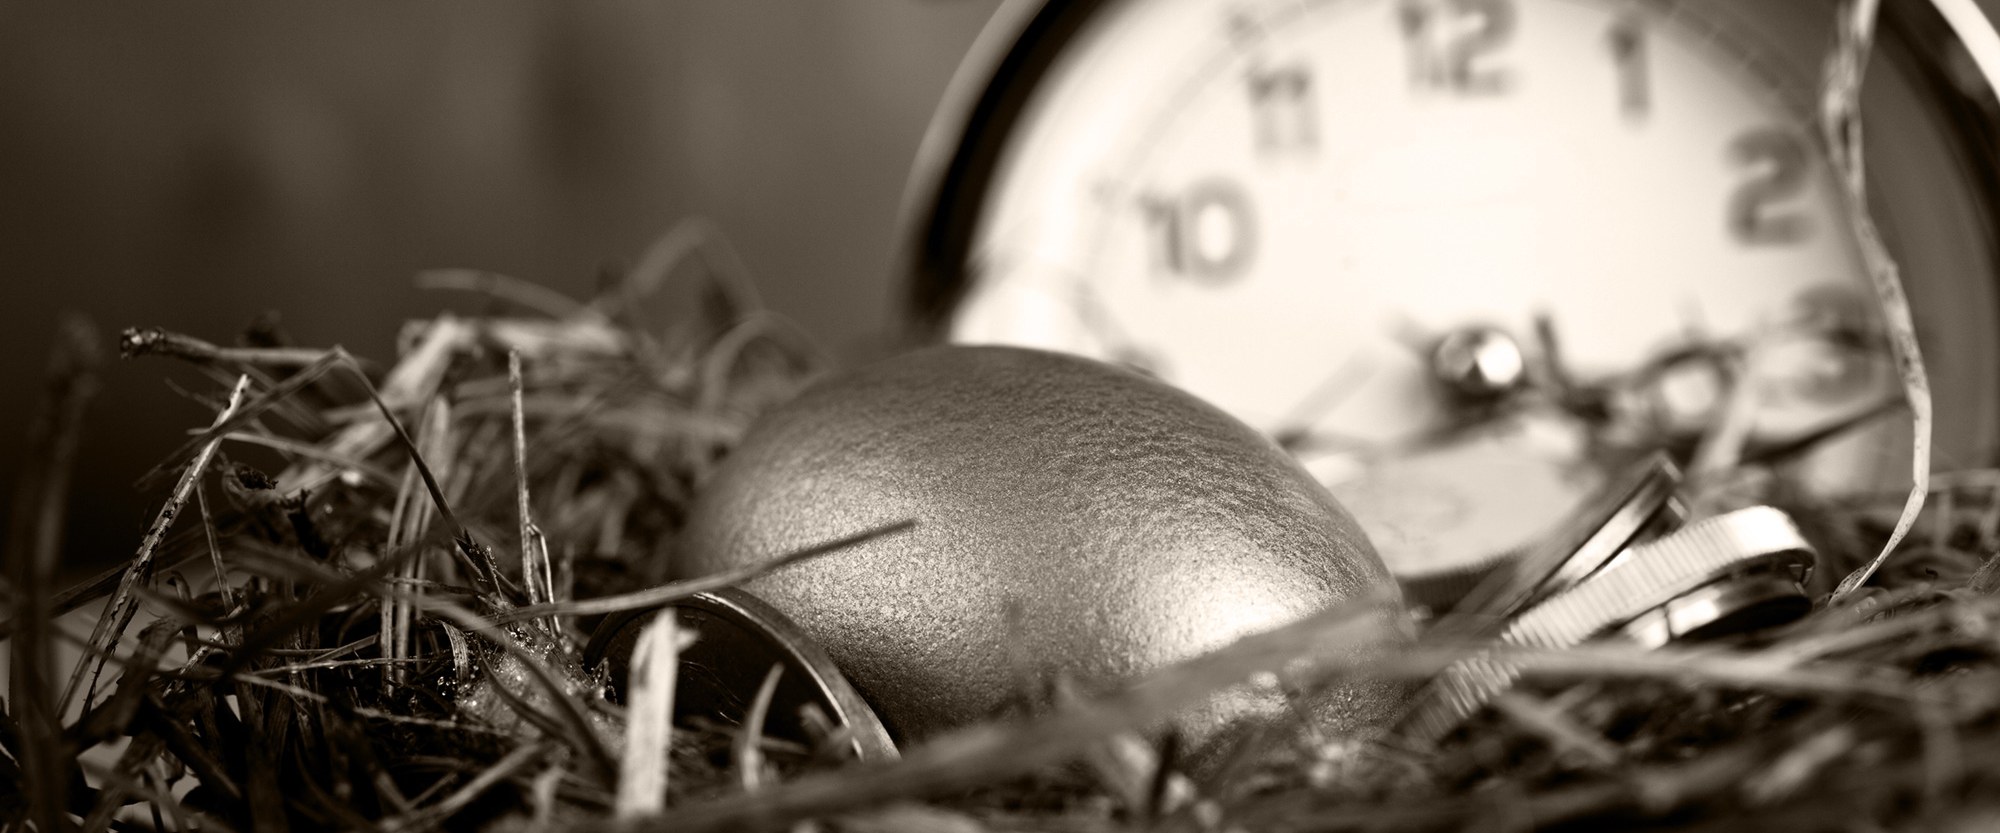 golden egg in a nest and a clock in background